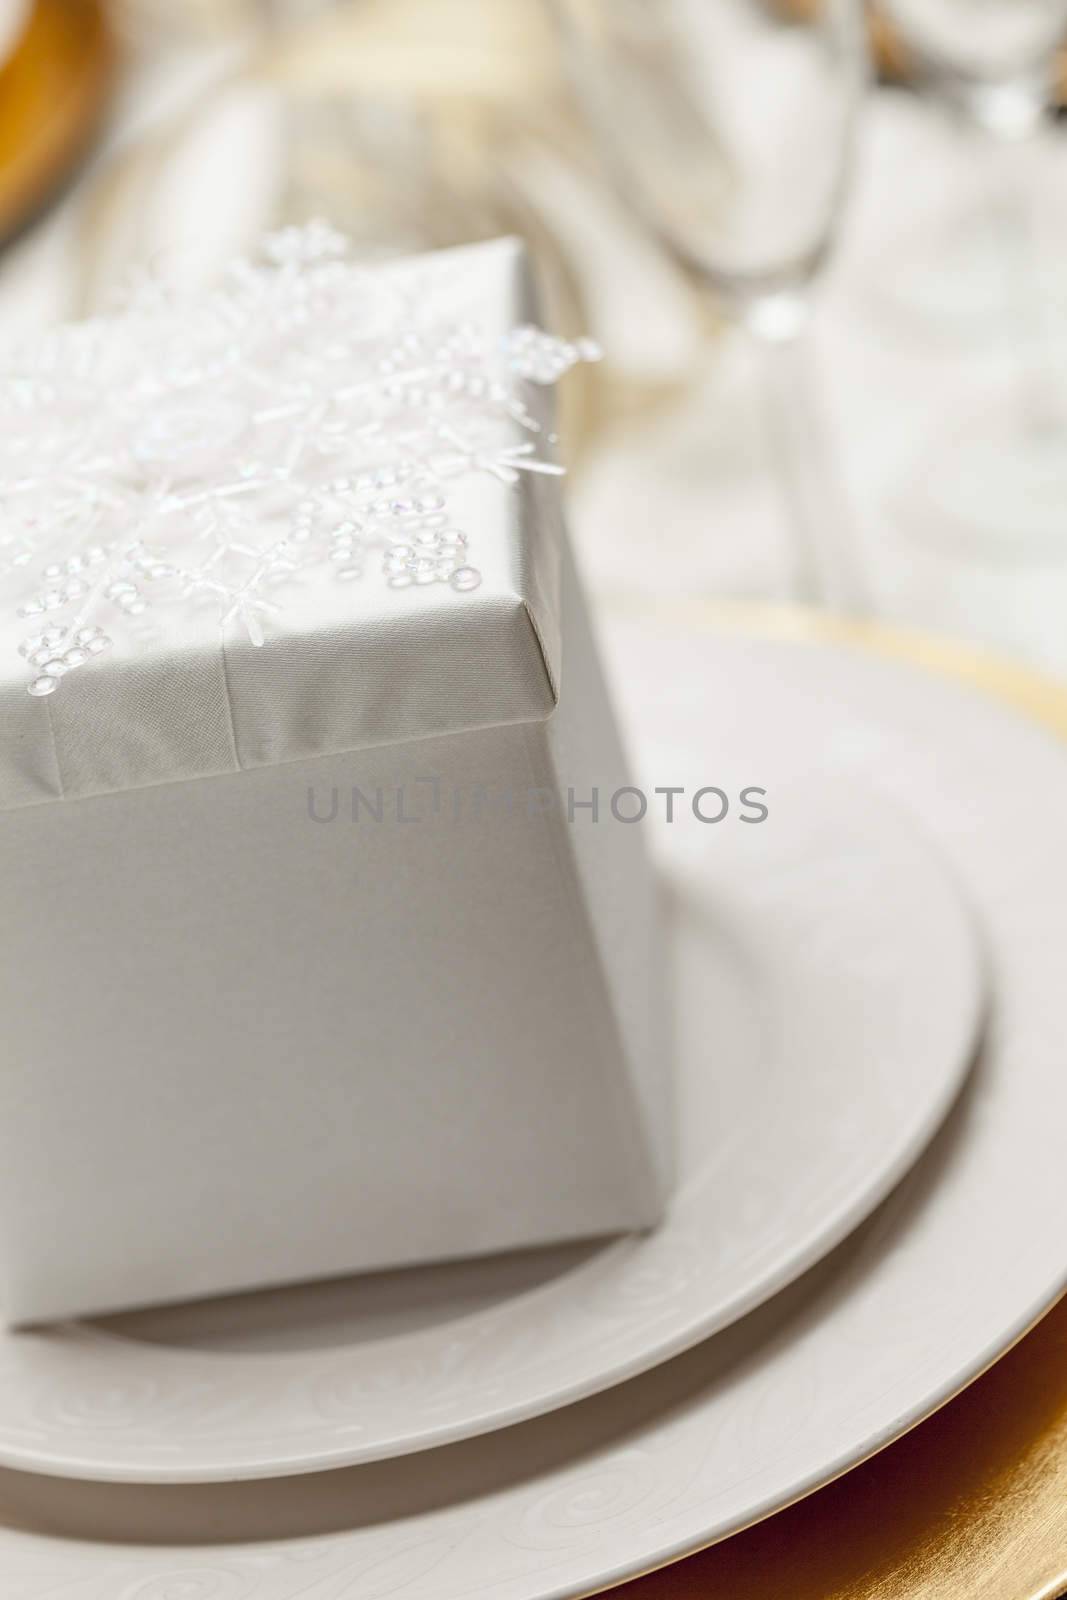 Beautiful Christmas Gift with Place Setting Abstract at Table.